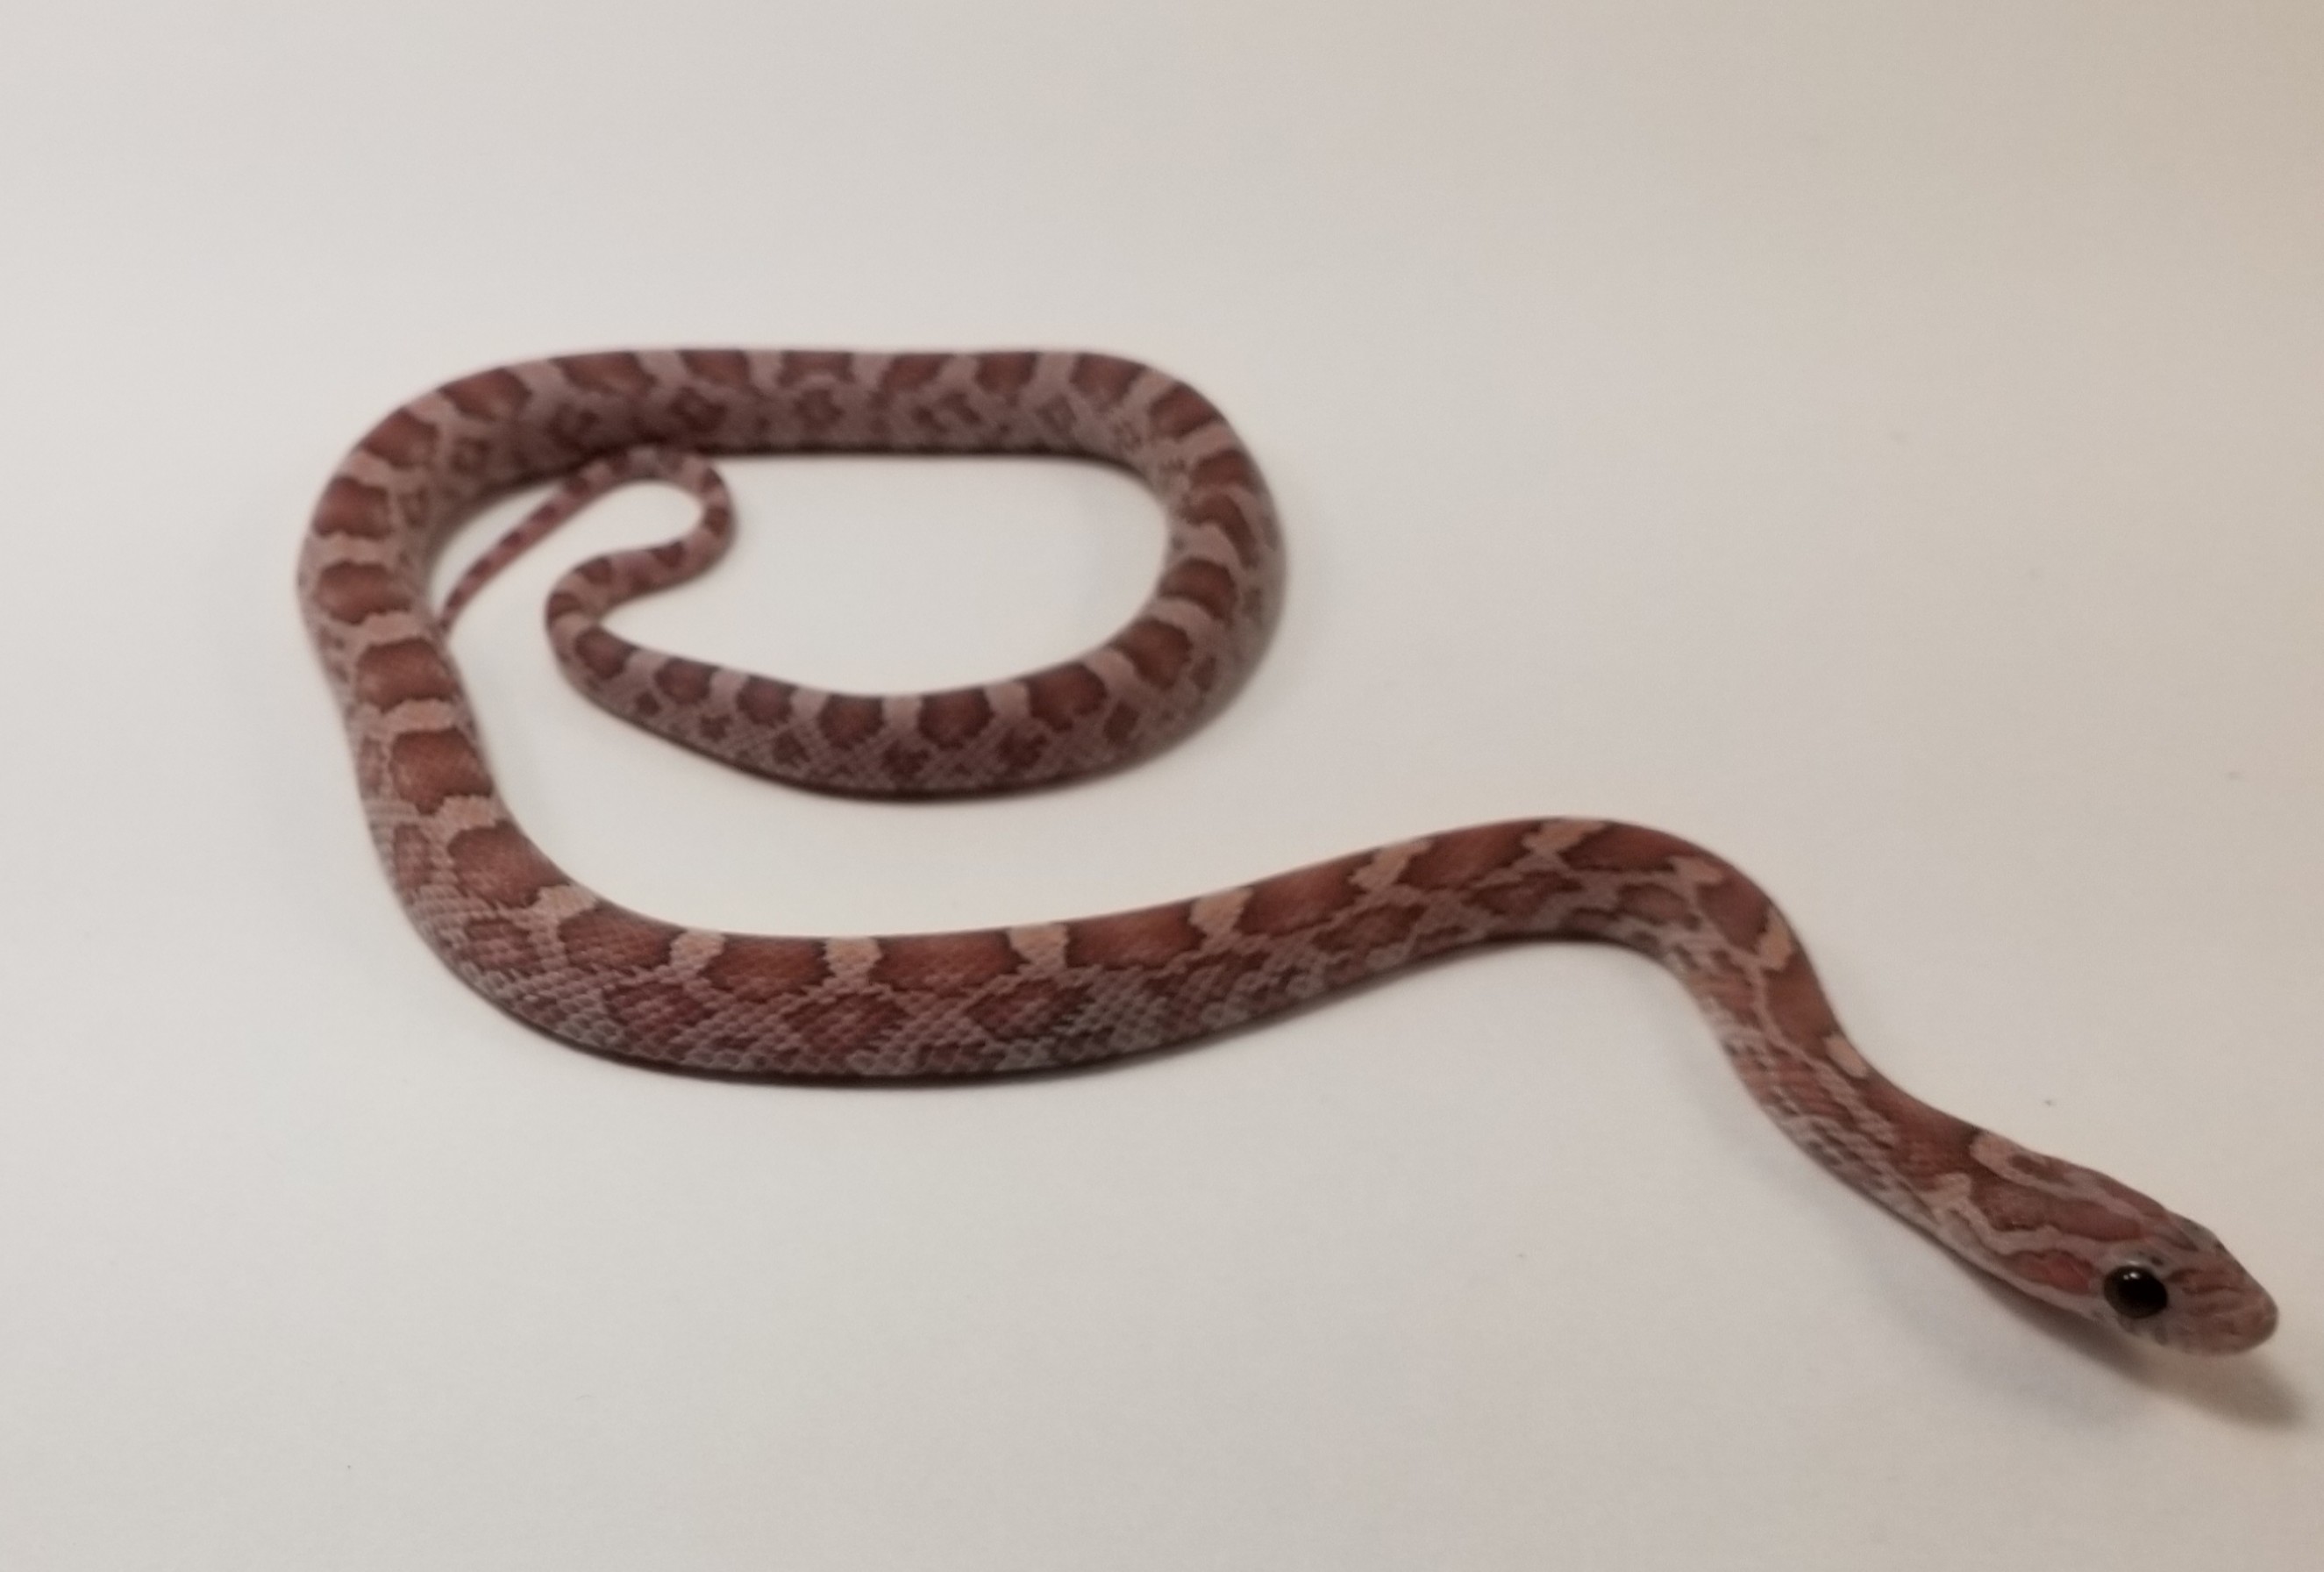 Lavender Corn Snake by Adrian's Captive Creation's